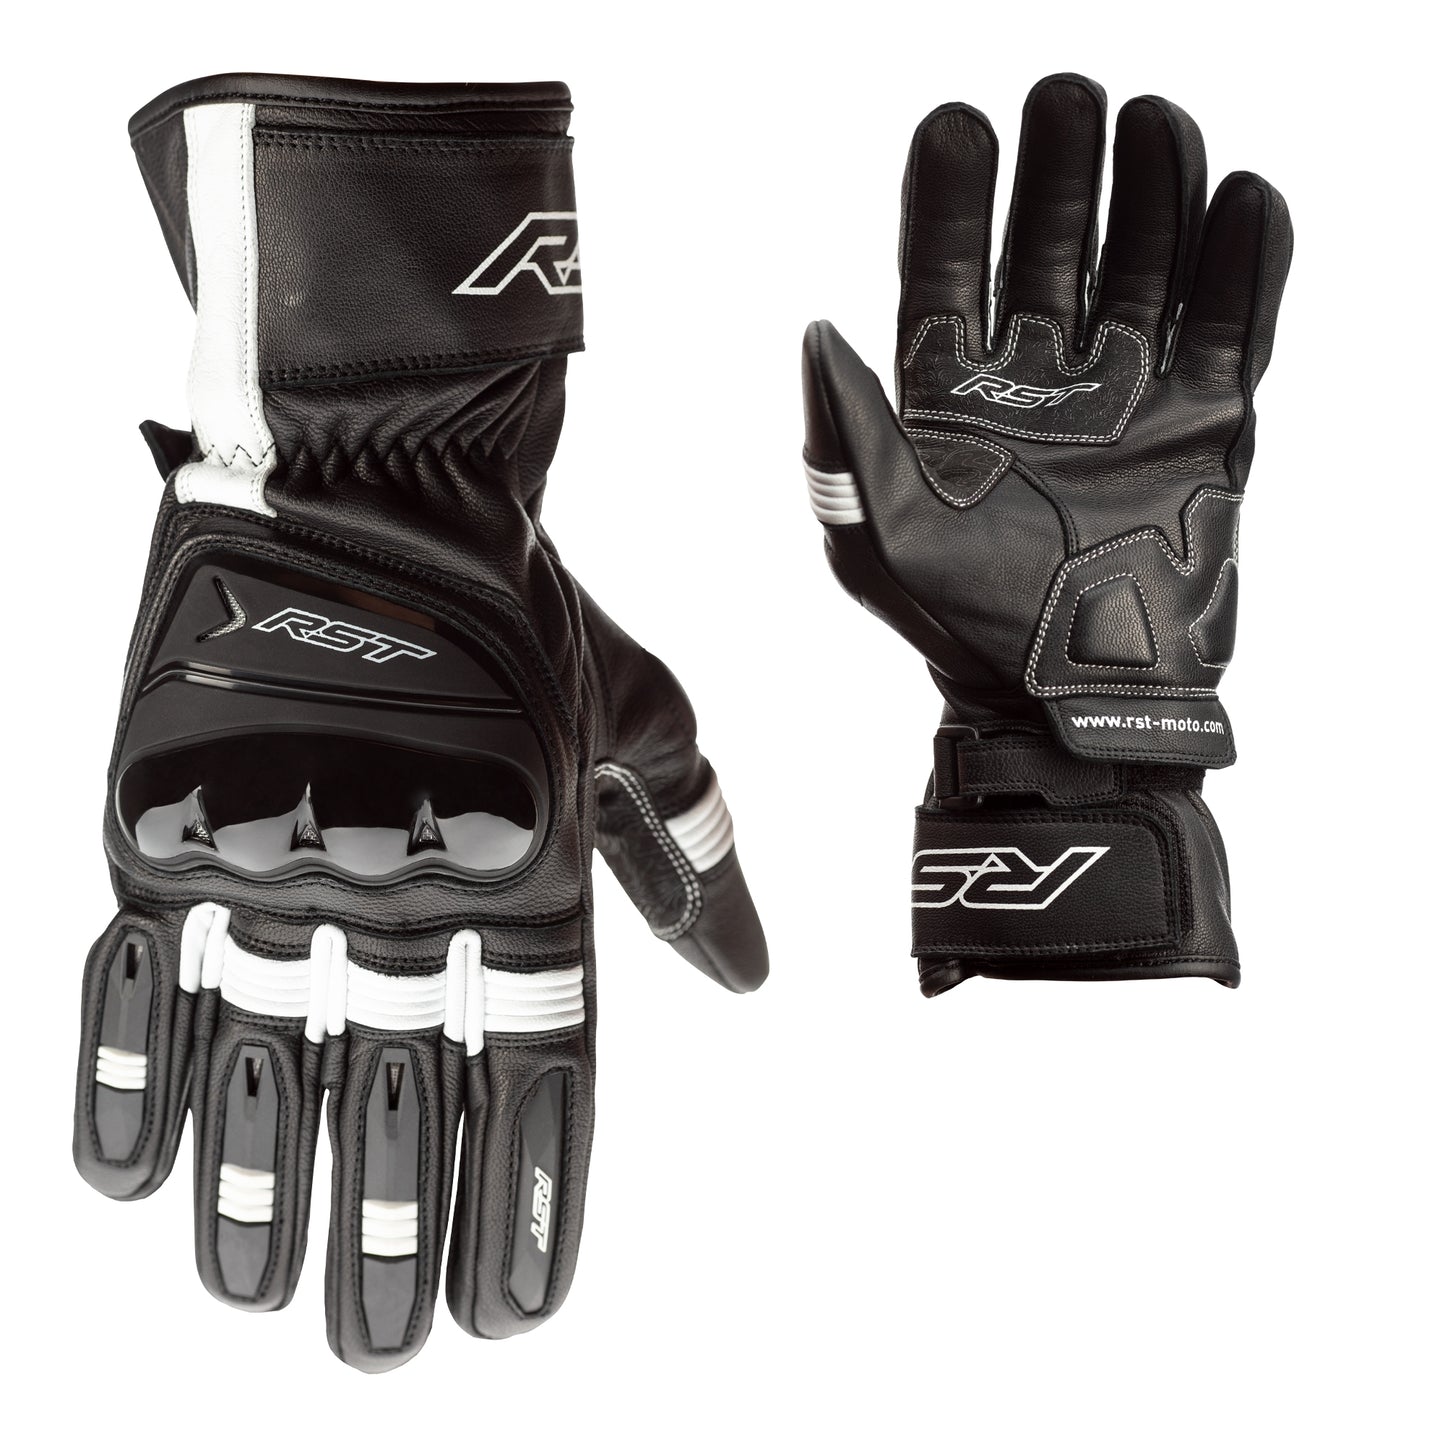 RST Pilot Leather Riding Gloves - CE APPROVED - Black/White